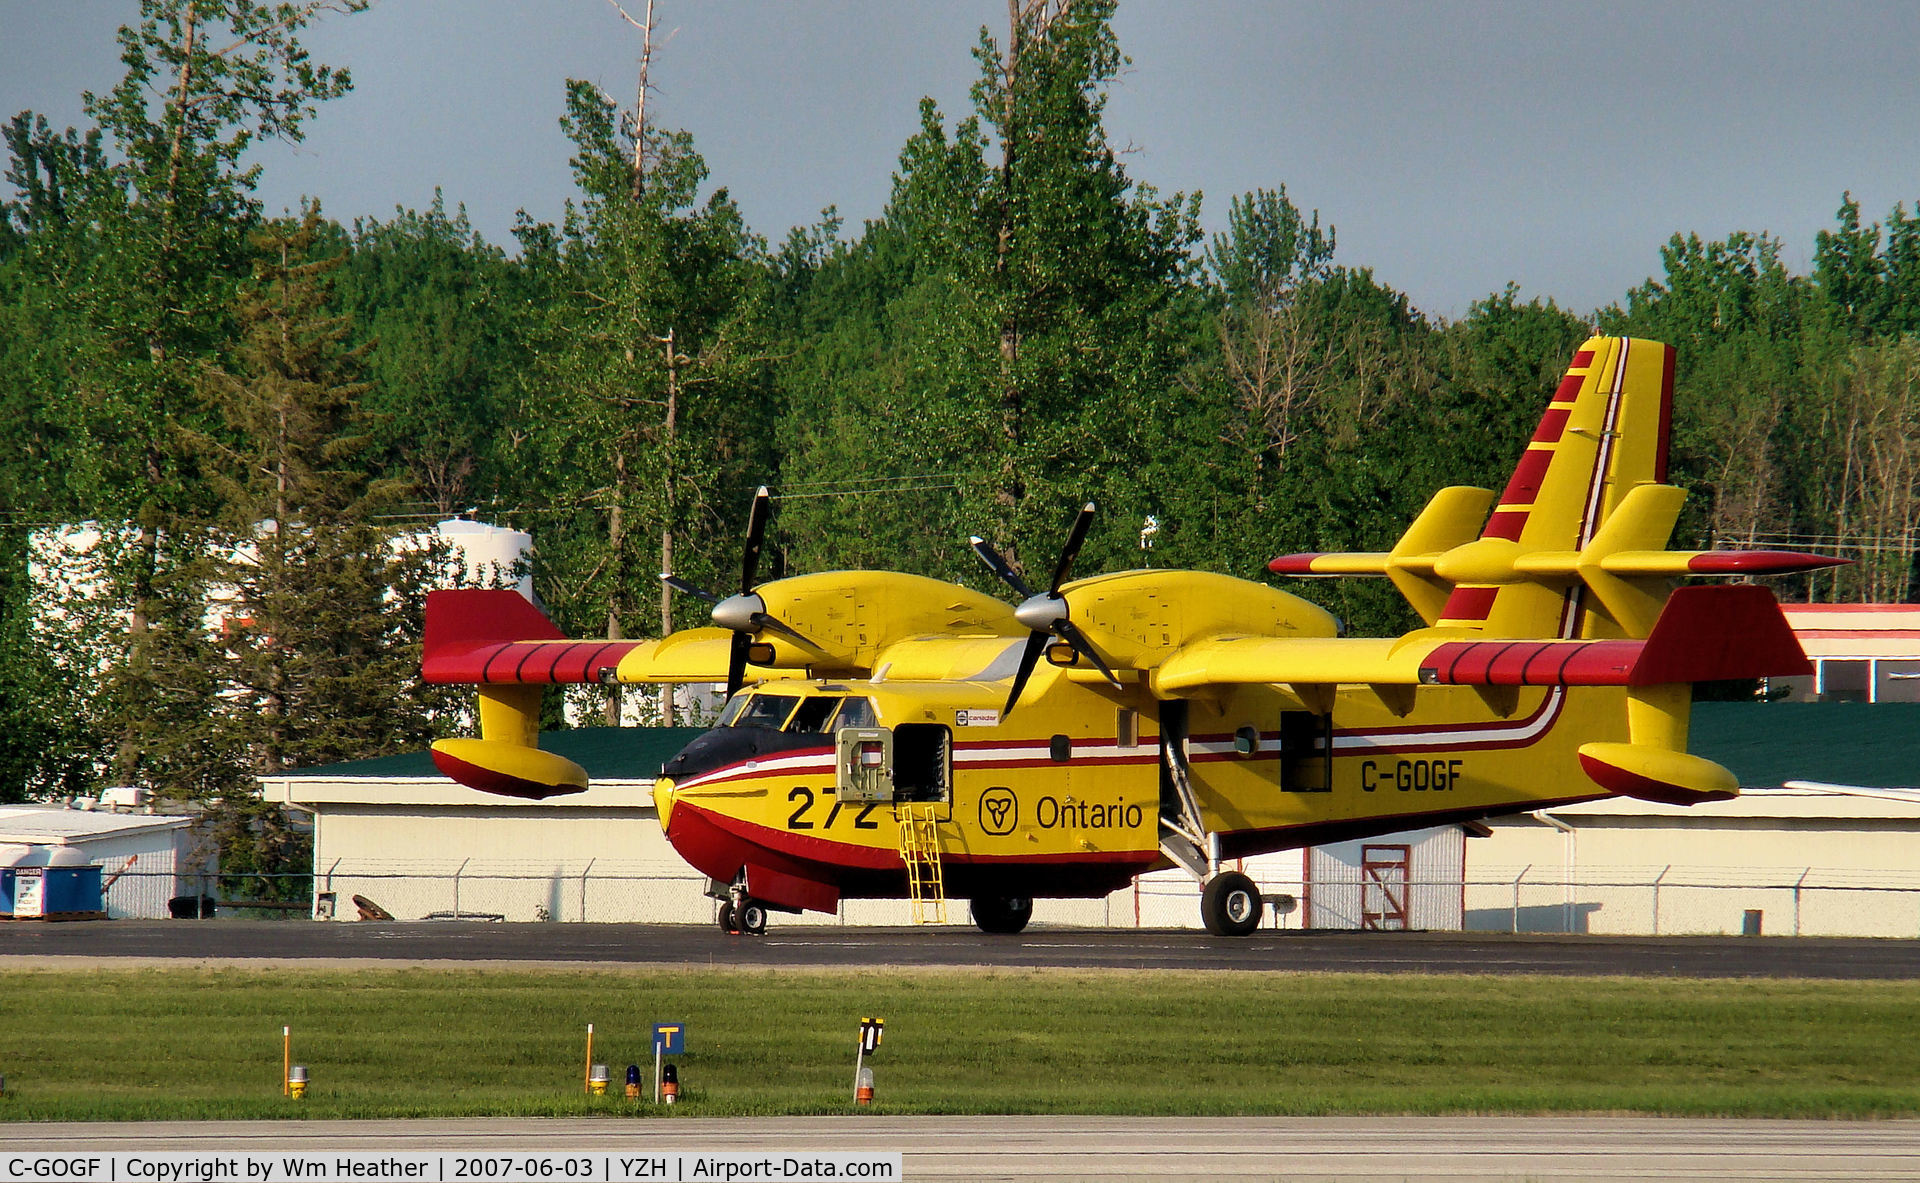 C-GOGF, 1997 Canadair CL-215-6B11 CL-415 C/N 2032, Waiting to go